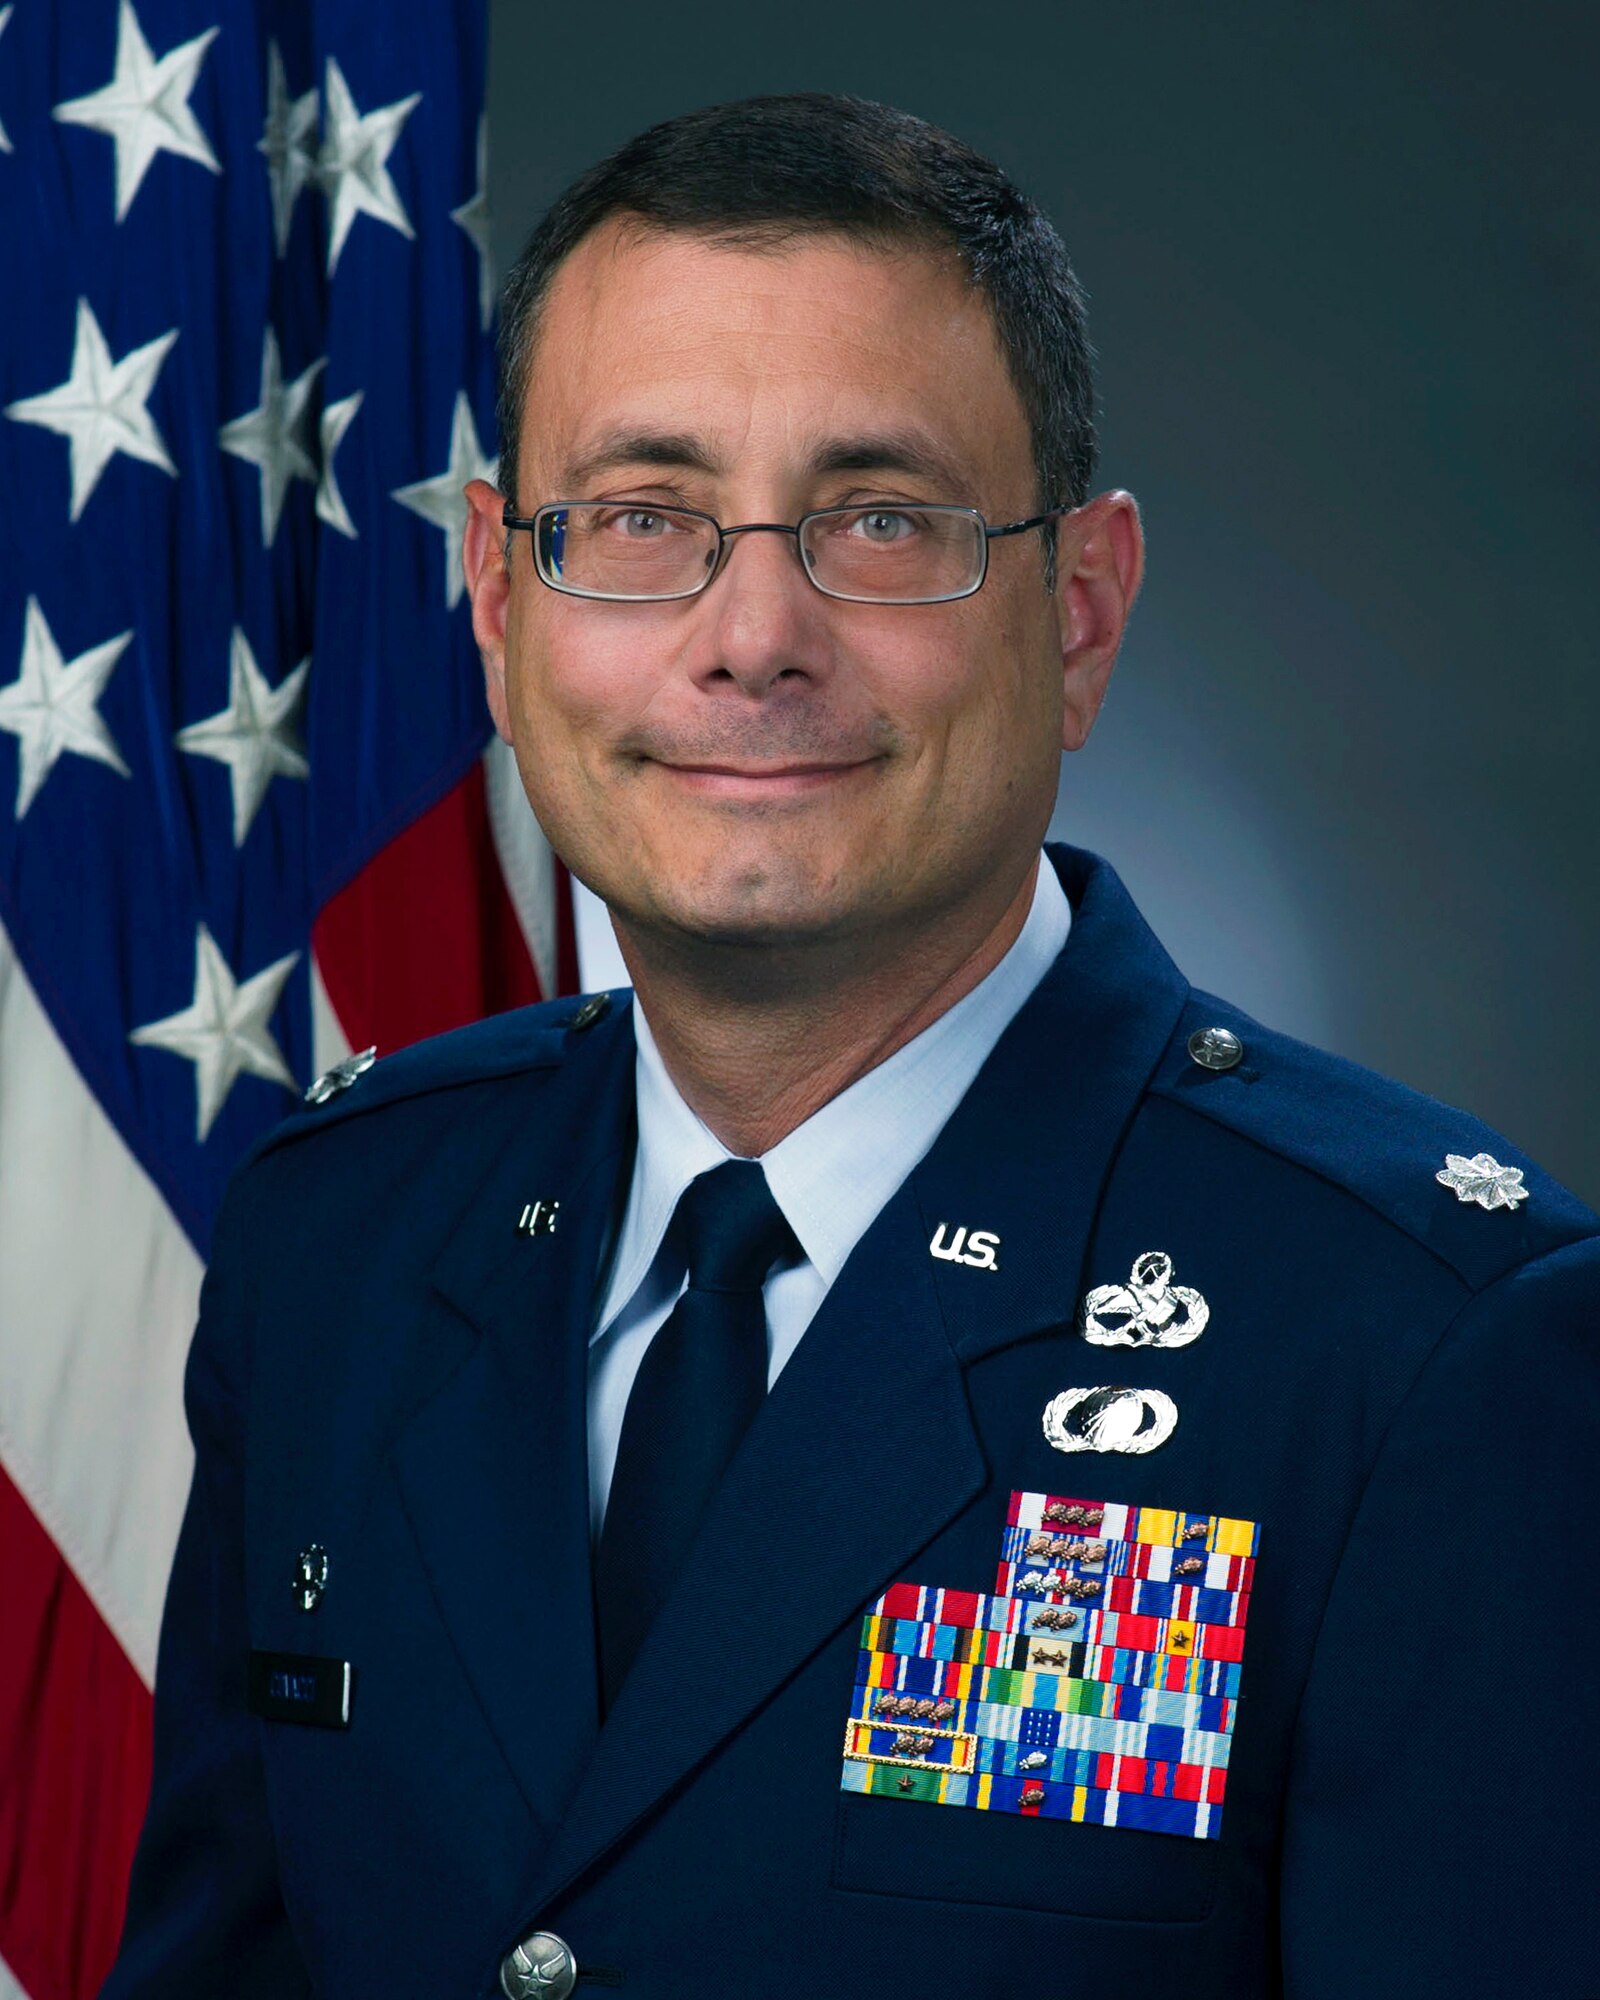 Commentary by Lt. Col. Claudio Covacci, 60th Maintenance Squadron
